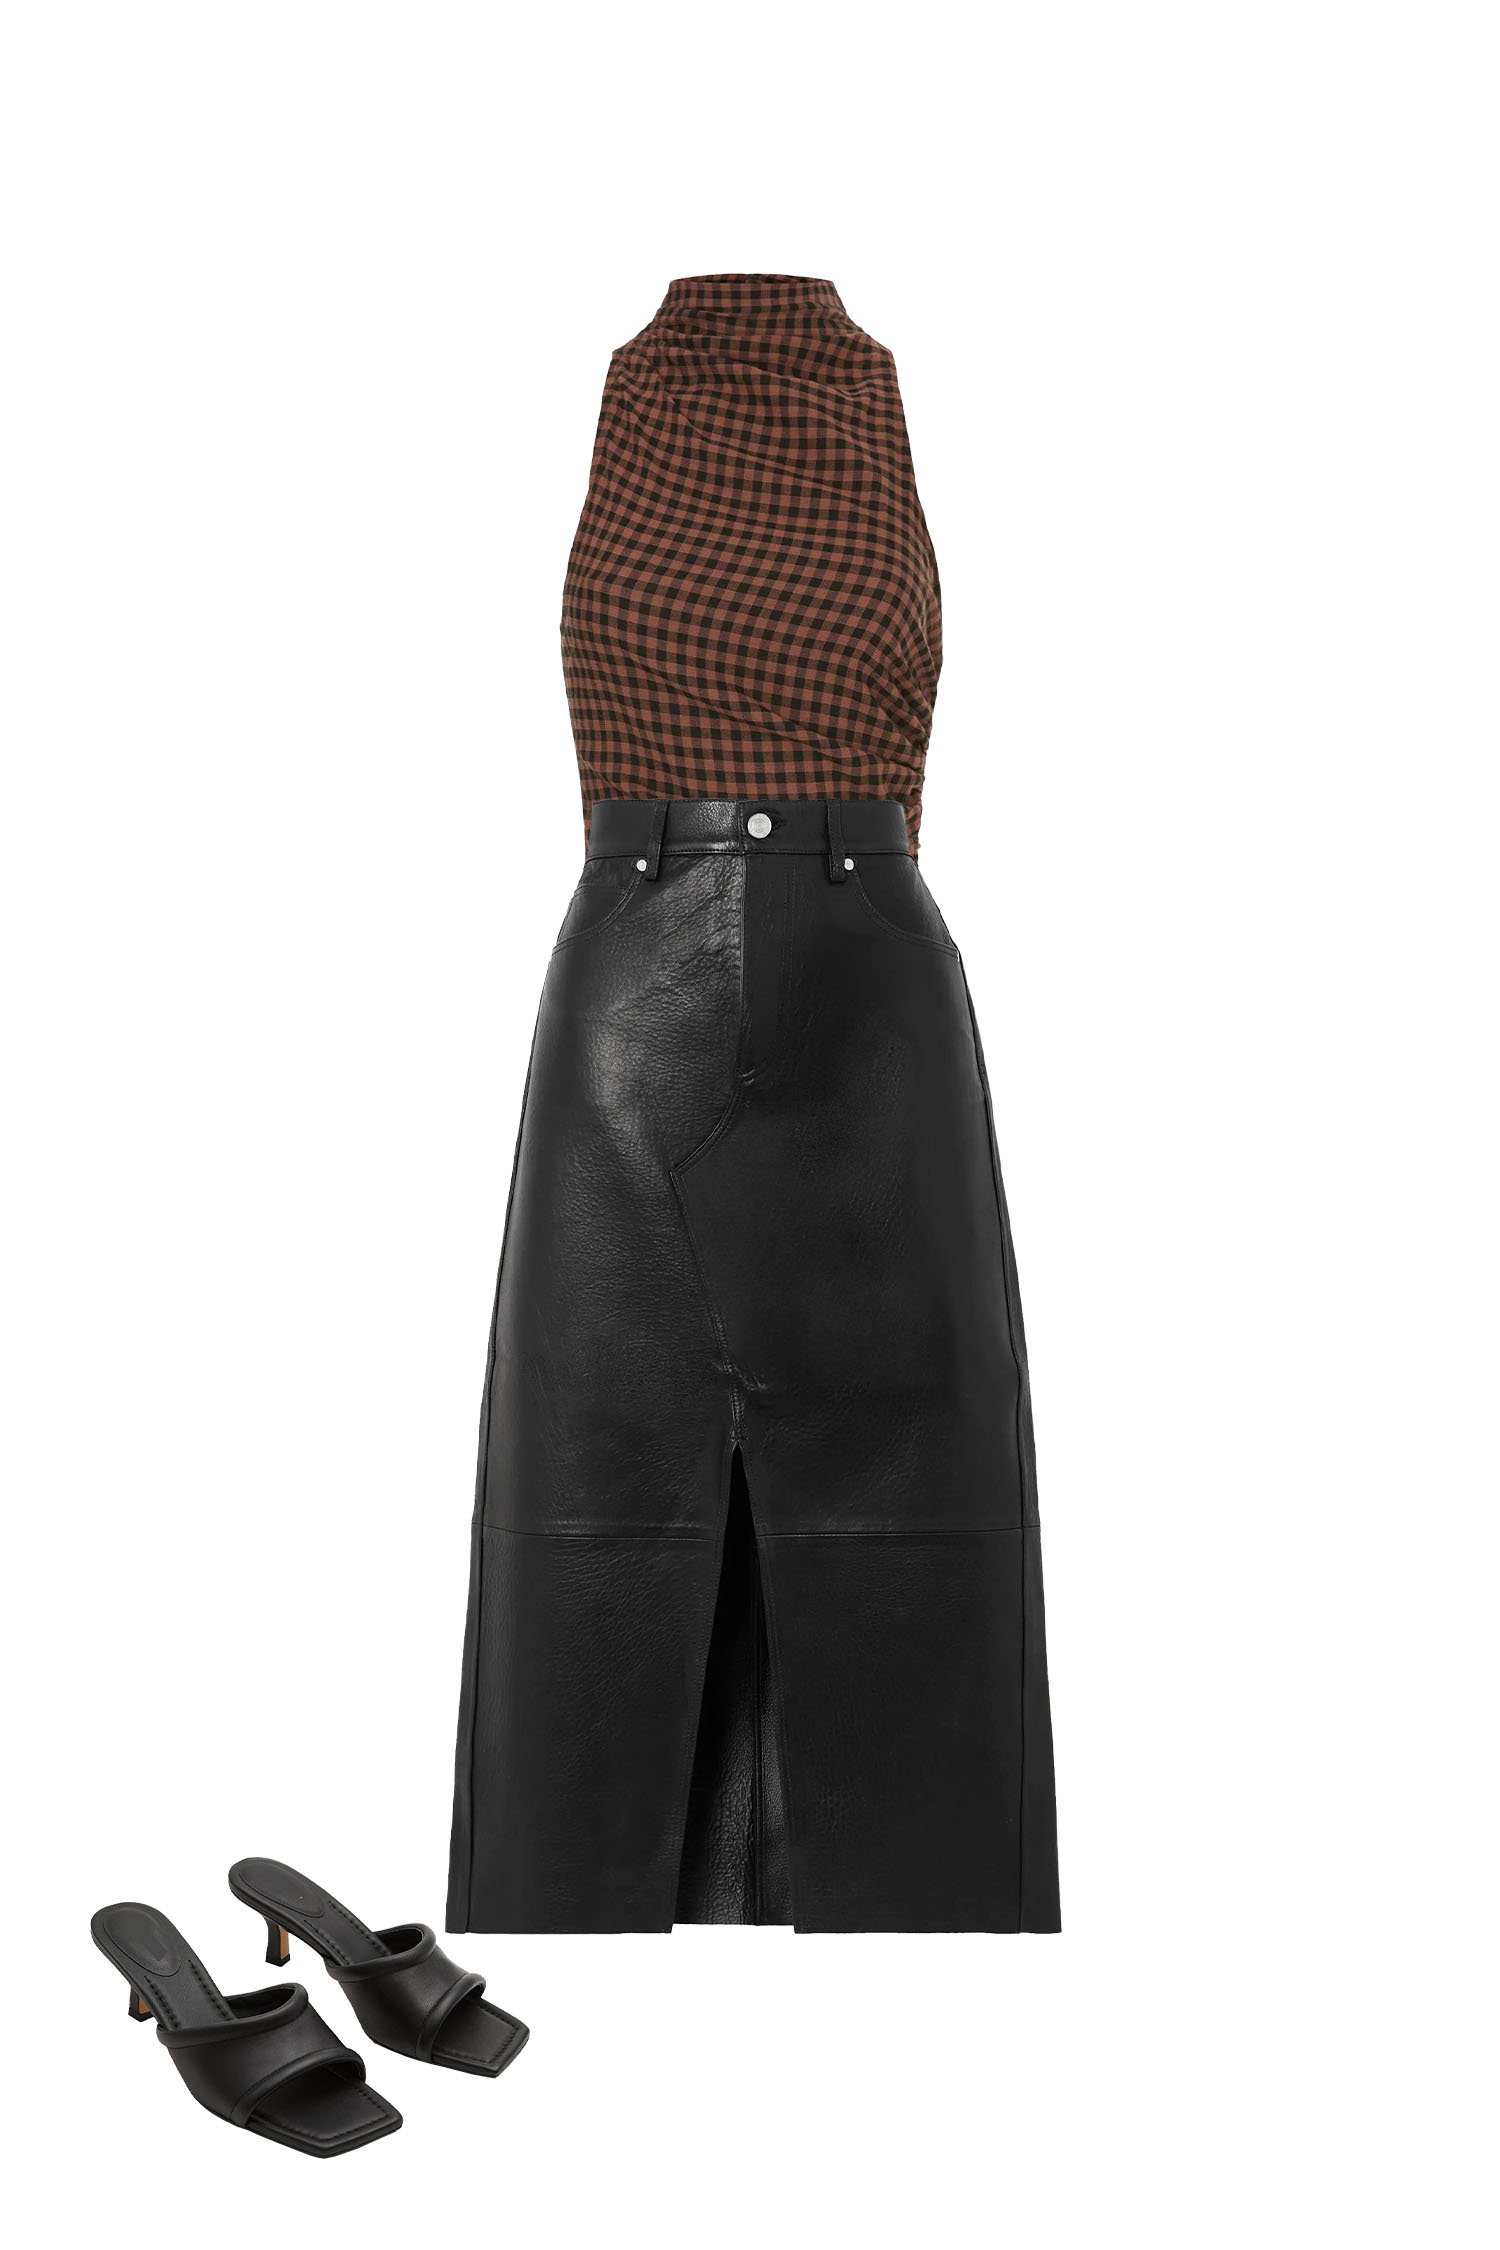 Black Leather Midi Skirt Outfit with Brown Check Print Sleeveless Top, and Black Square Toe Kitten Heel Sandals